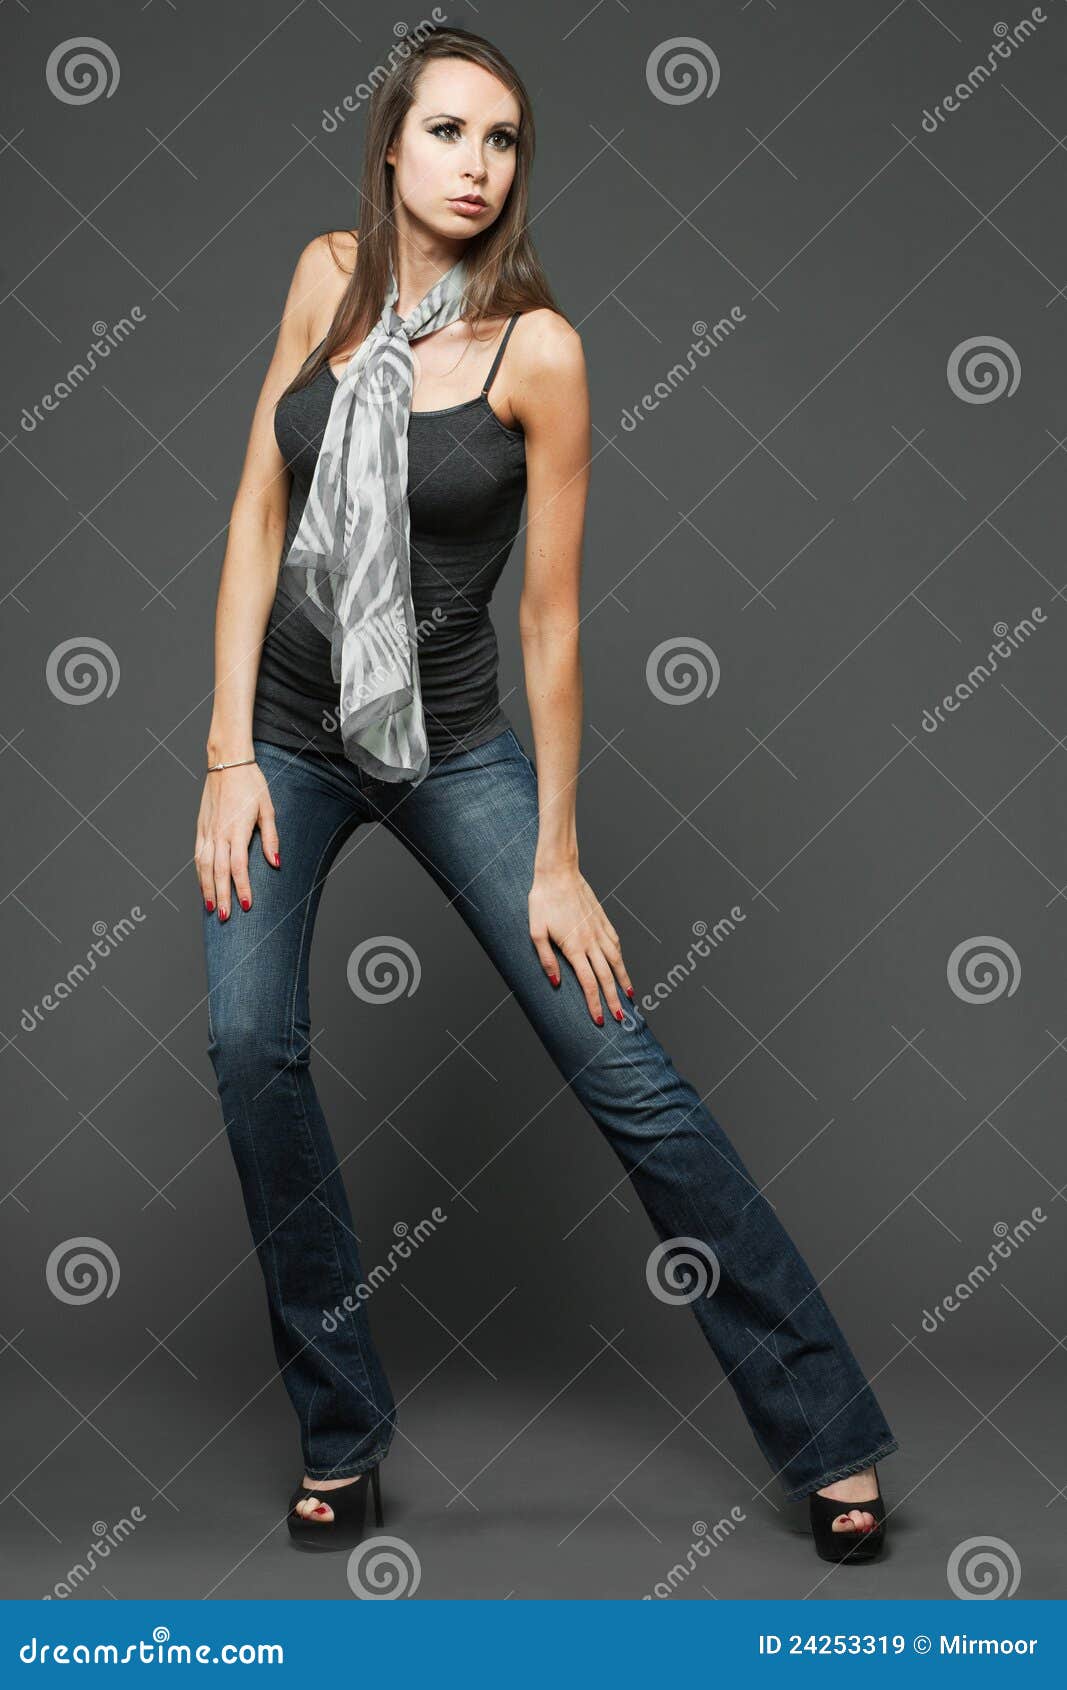 Young Attractive Slim Fashion Model. Stock Image - Image of hair ...